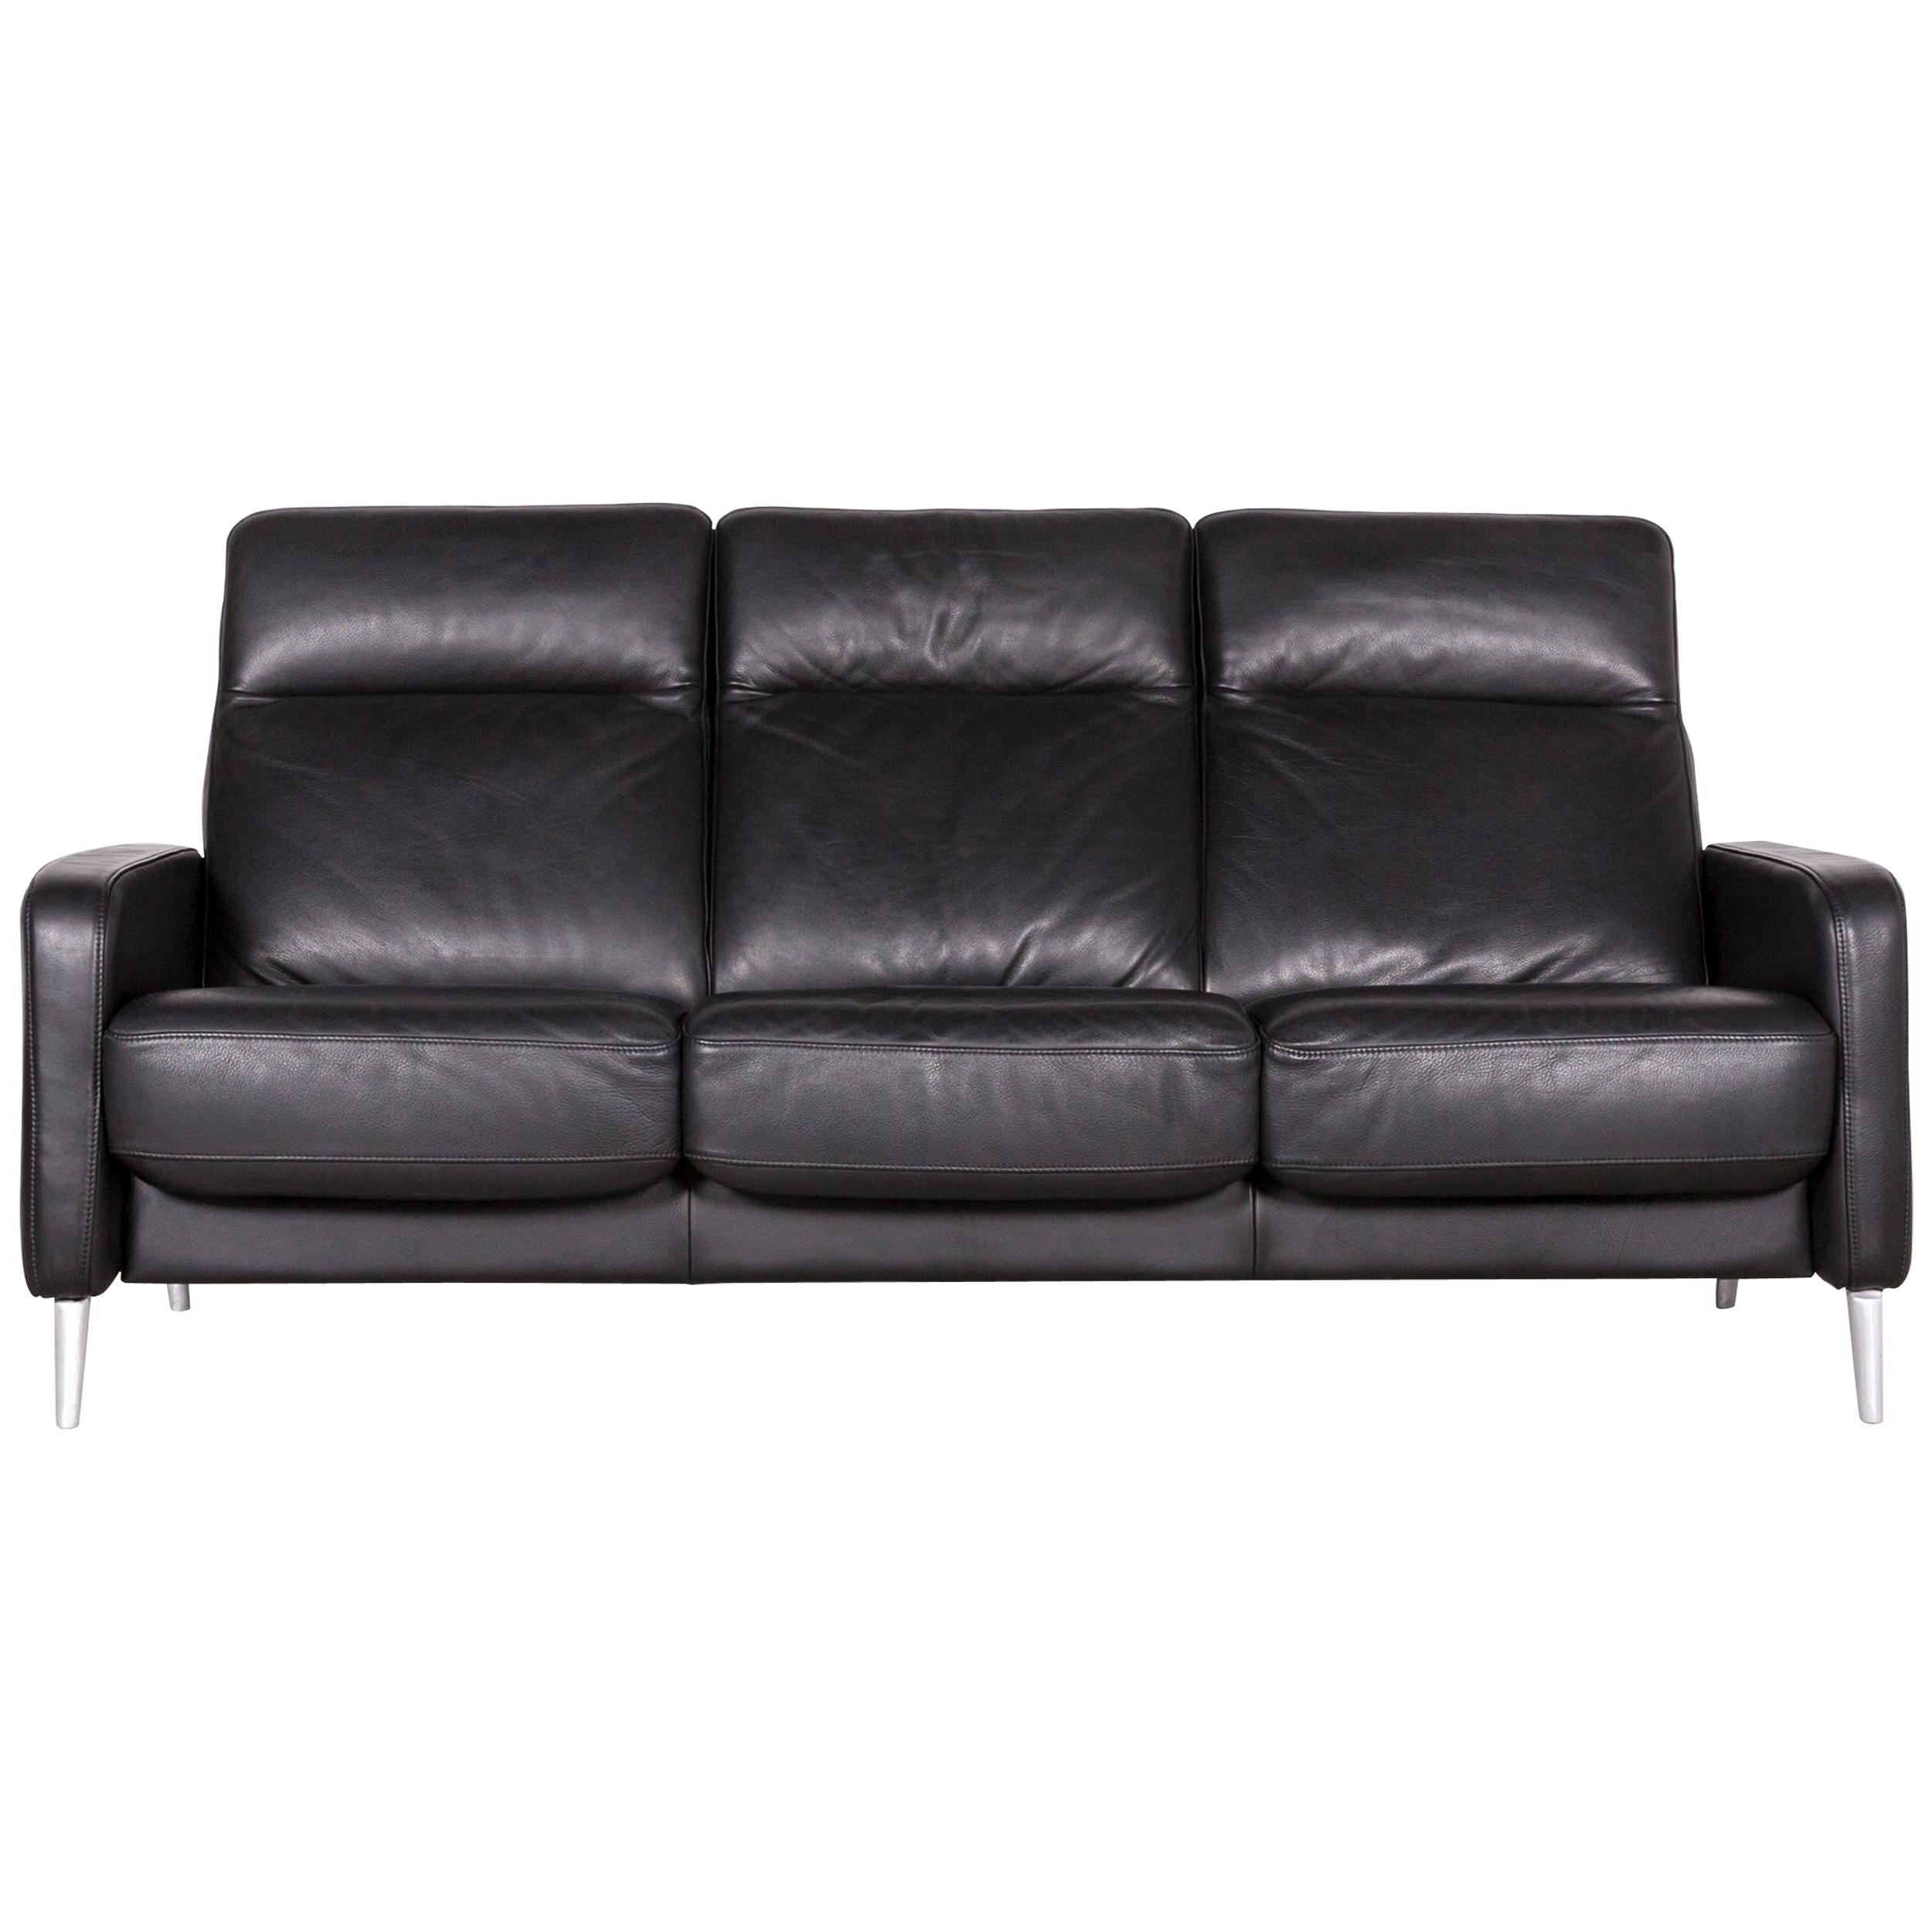 Musterring Designer Leather Sofa Black Three-Seat Couch For Sale